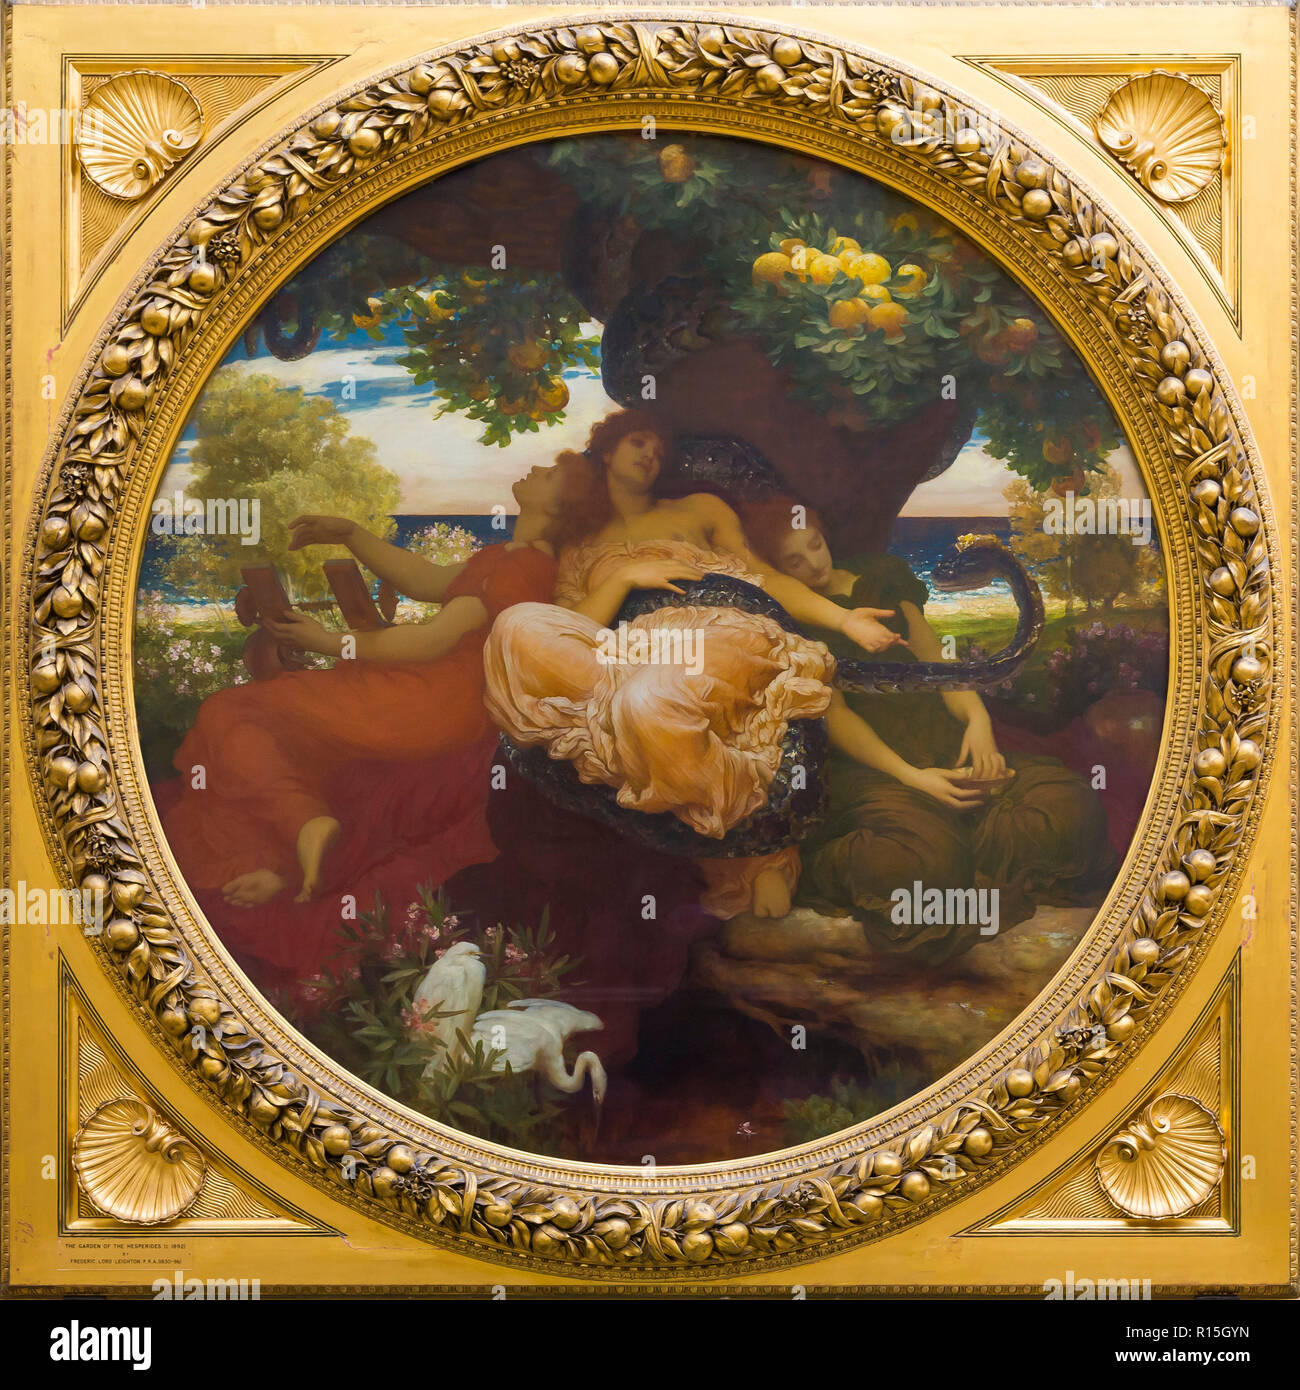 Le Jardin des Hespérides, Frederic Leighton, 1891-1892, levier Dame Art Gallery, Port Sunlight, Liverpool, Angleterre, Royaume-Uni, Europe Banque D'Images